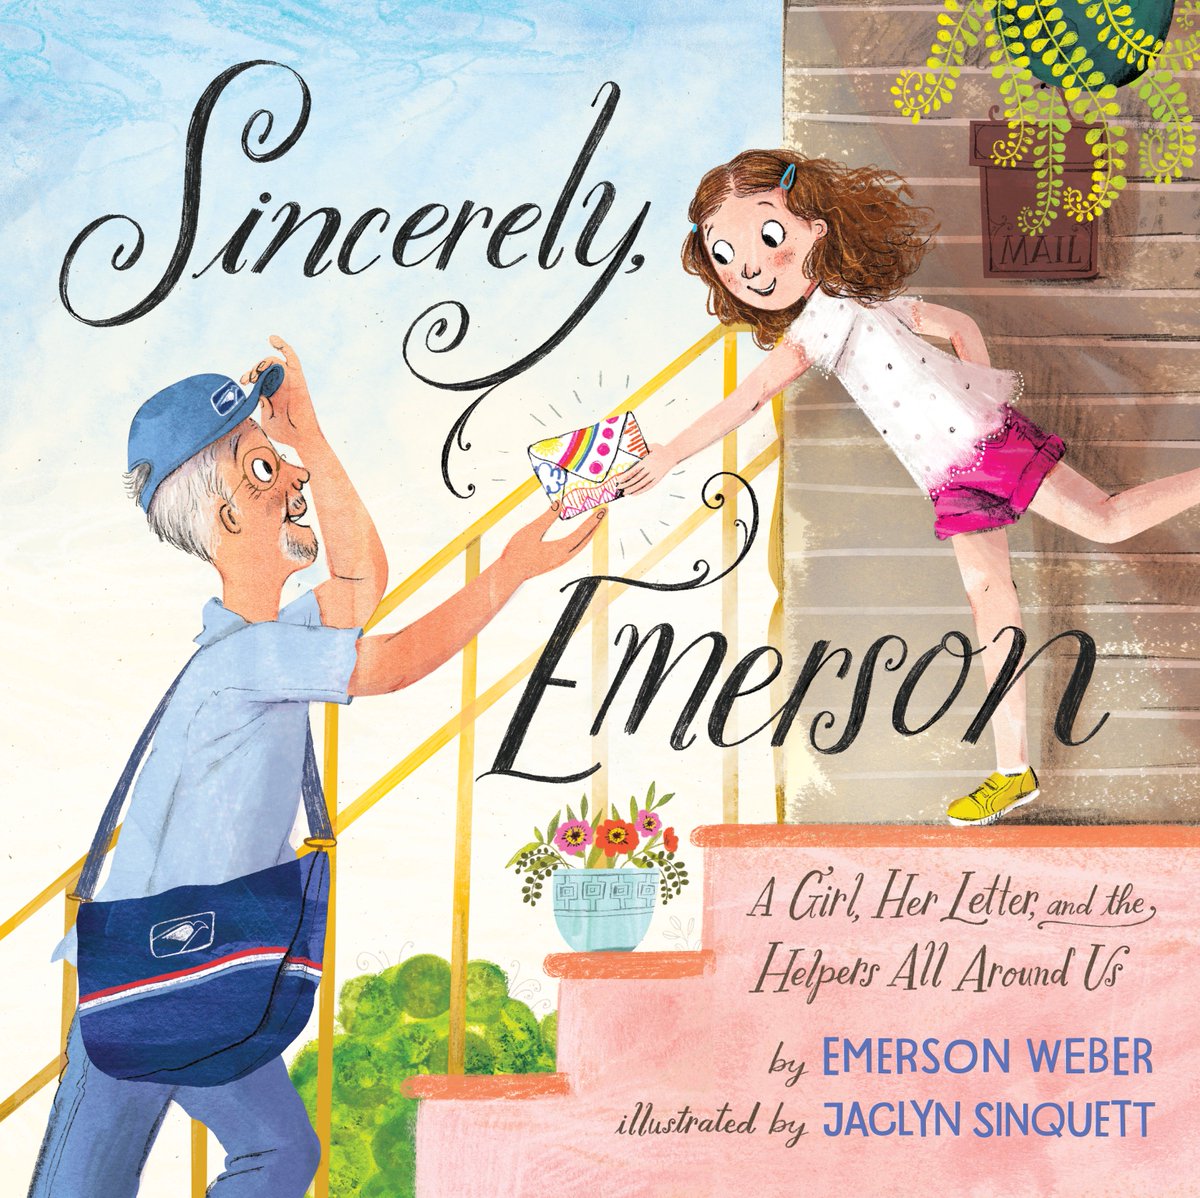 So, today, our exciting news is...As Emerson would say, imaginary drumroll please…Sincerely, Emerson!It’s going to be available for everyone on January 5th, 2021. Emerson wants everyone to know that it will even be in Target. :)